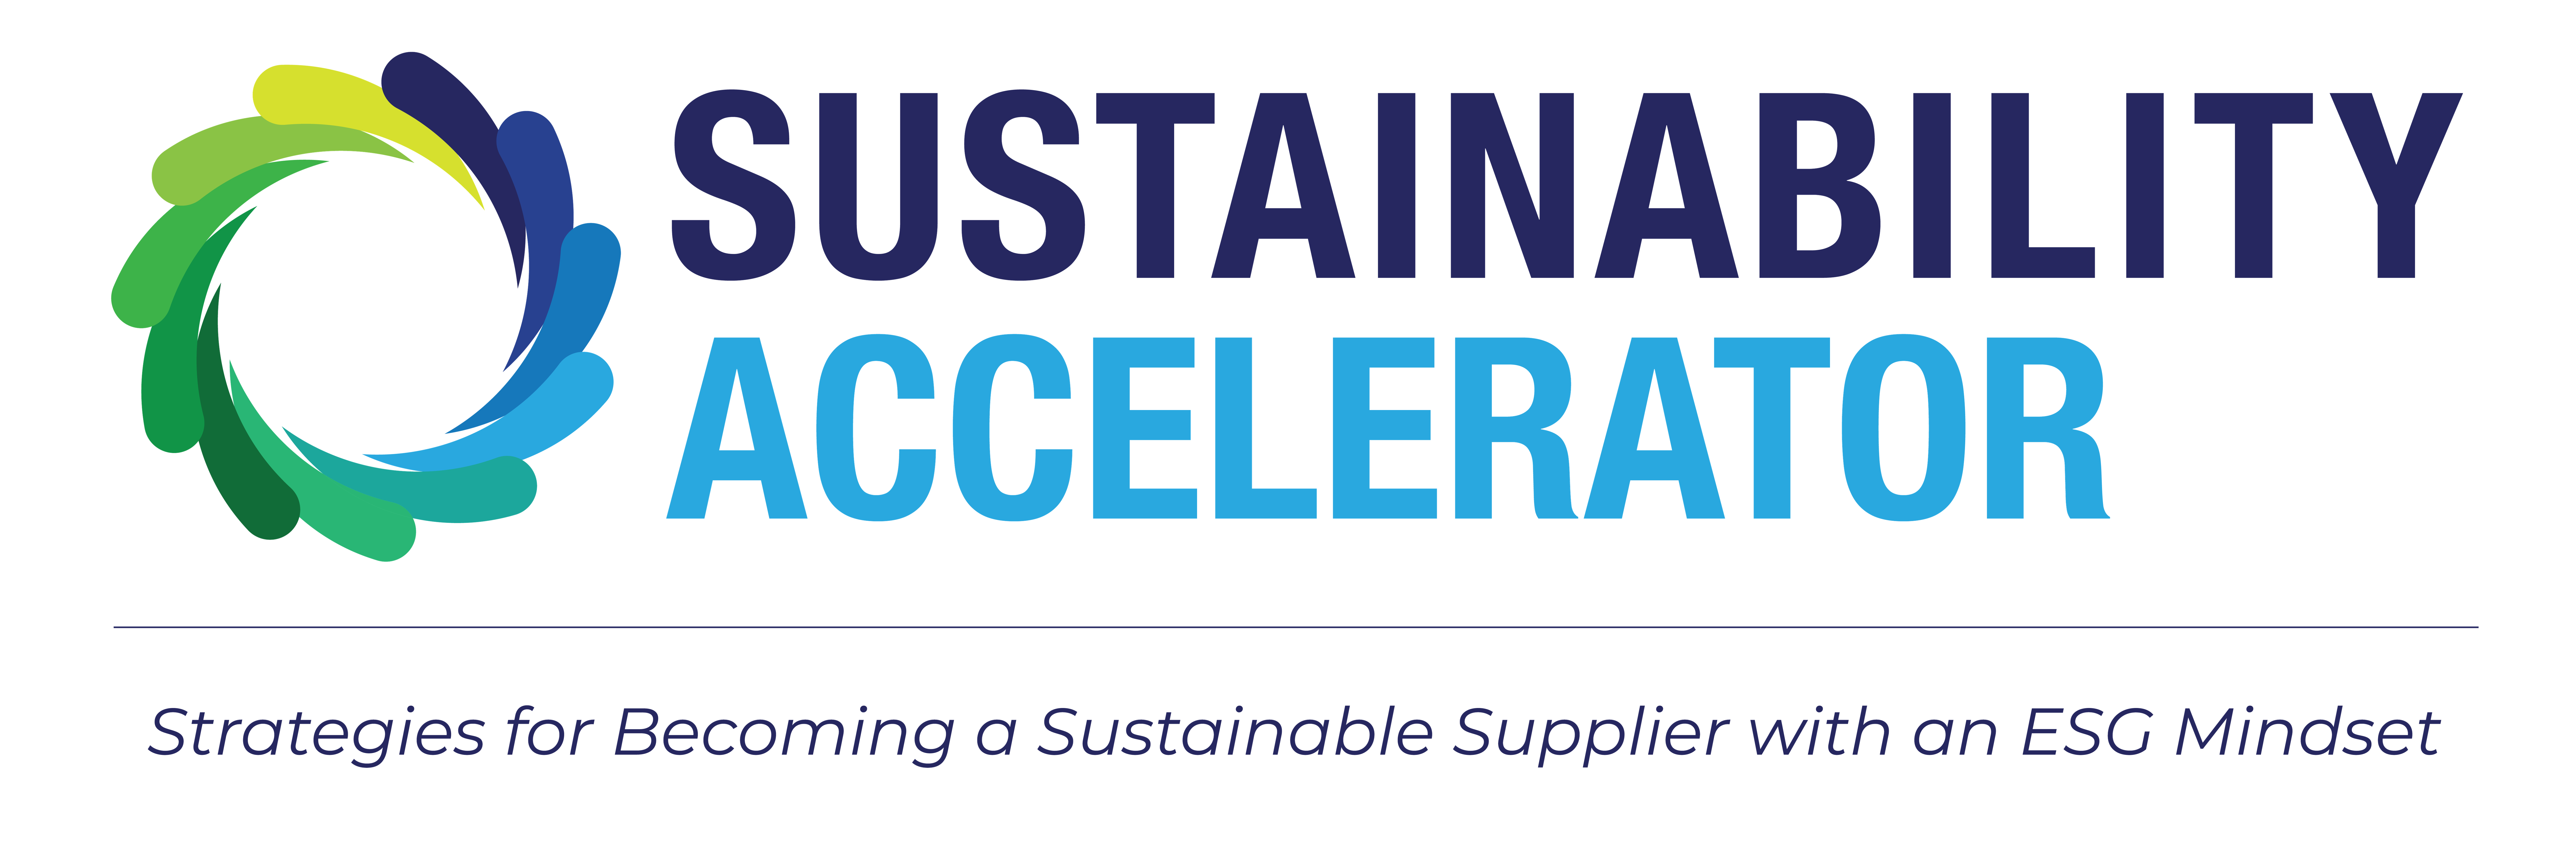 Sustainability Accelerator: Strategies for becoming a sustainable supplier with an ESG mindset